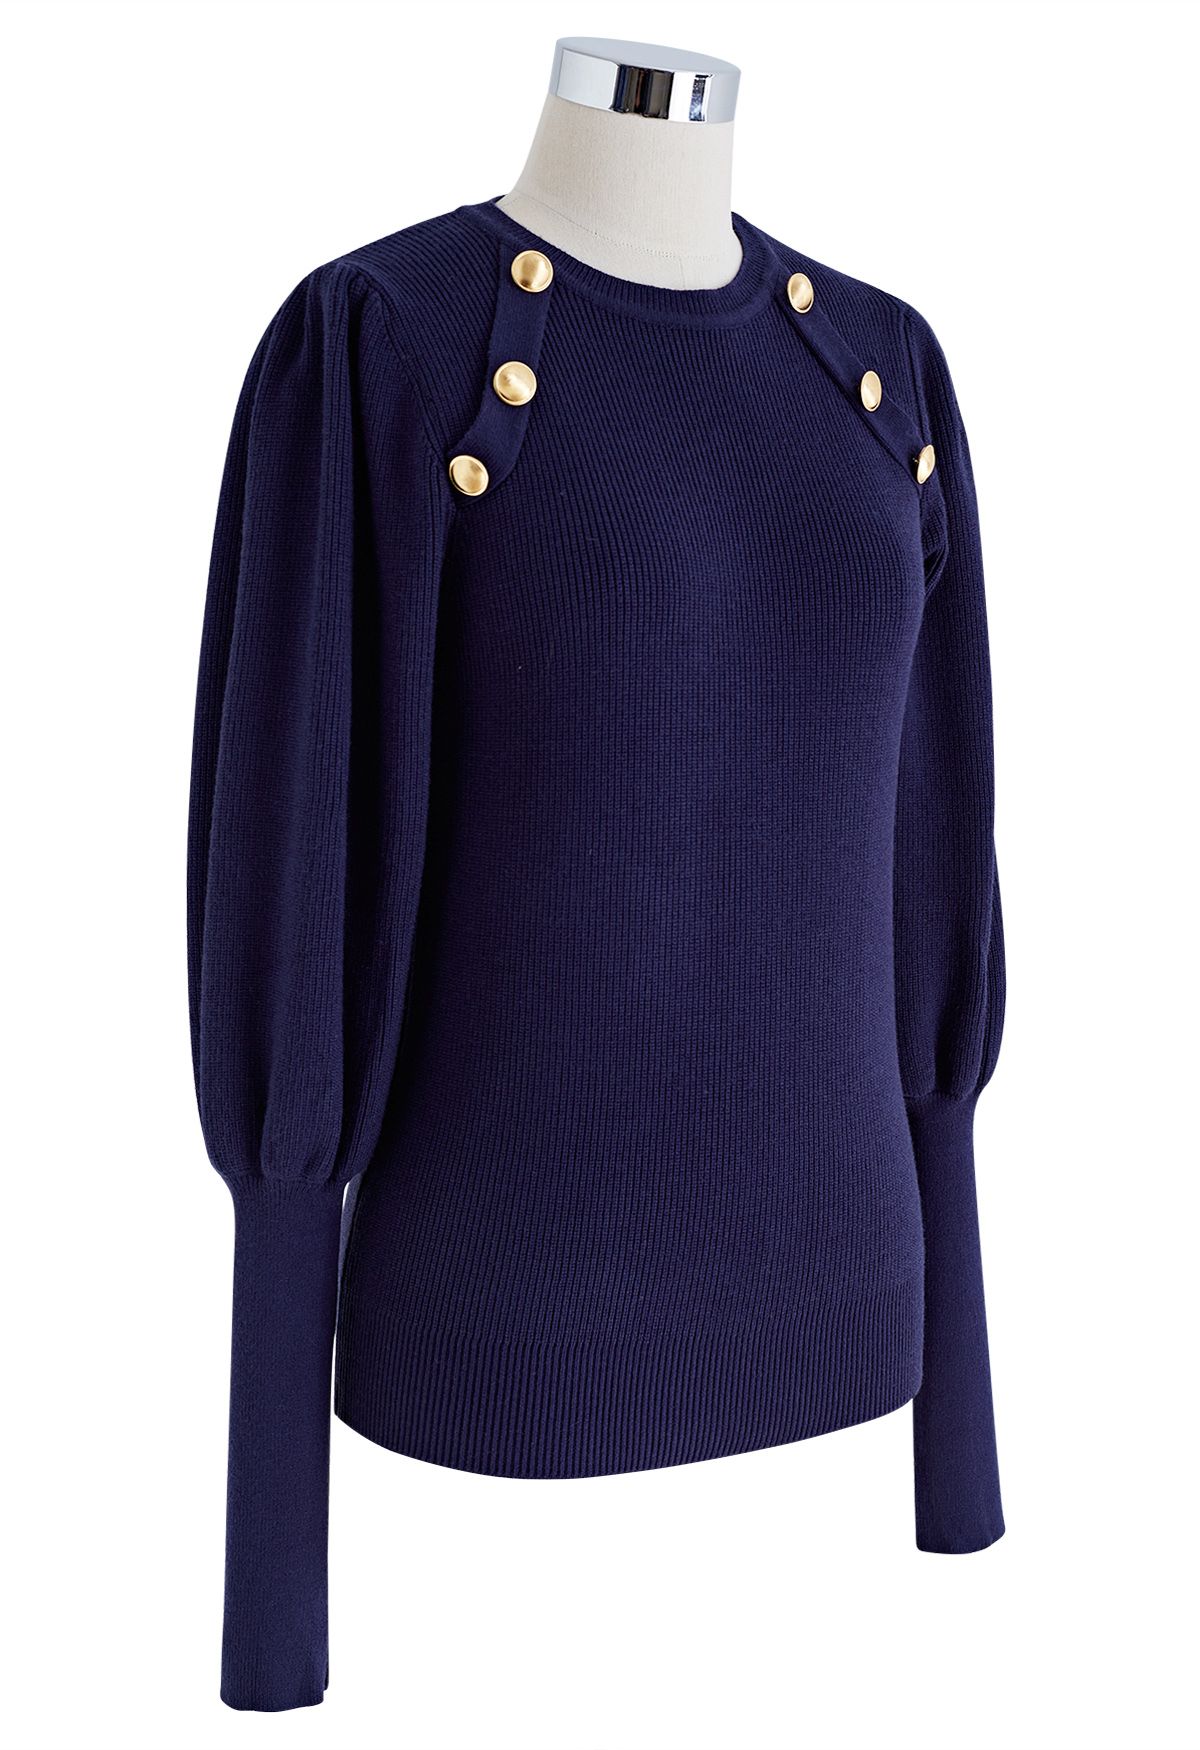 Bubble Sleeves Button Trimmed Knit Top in Navy